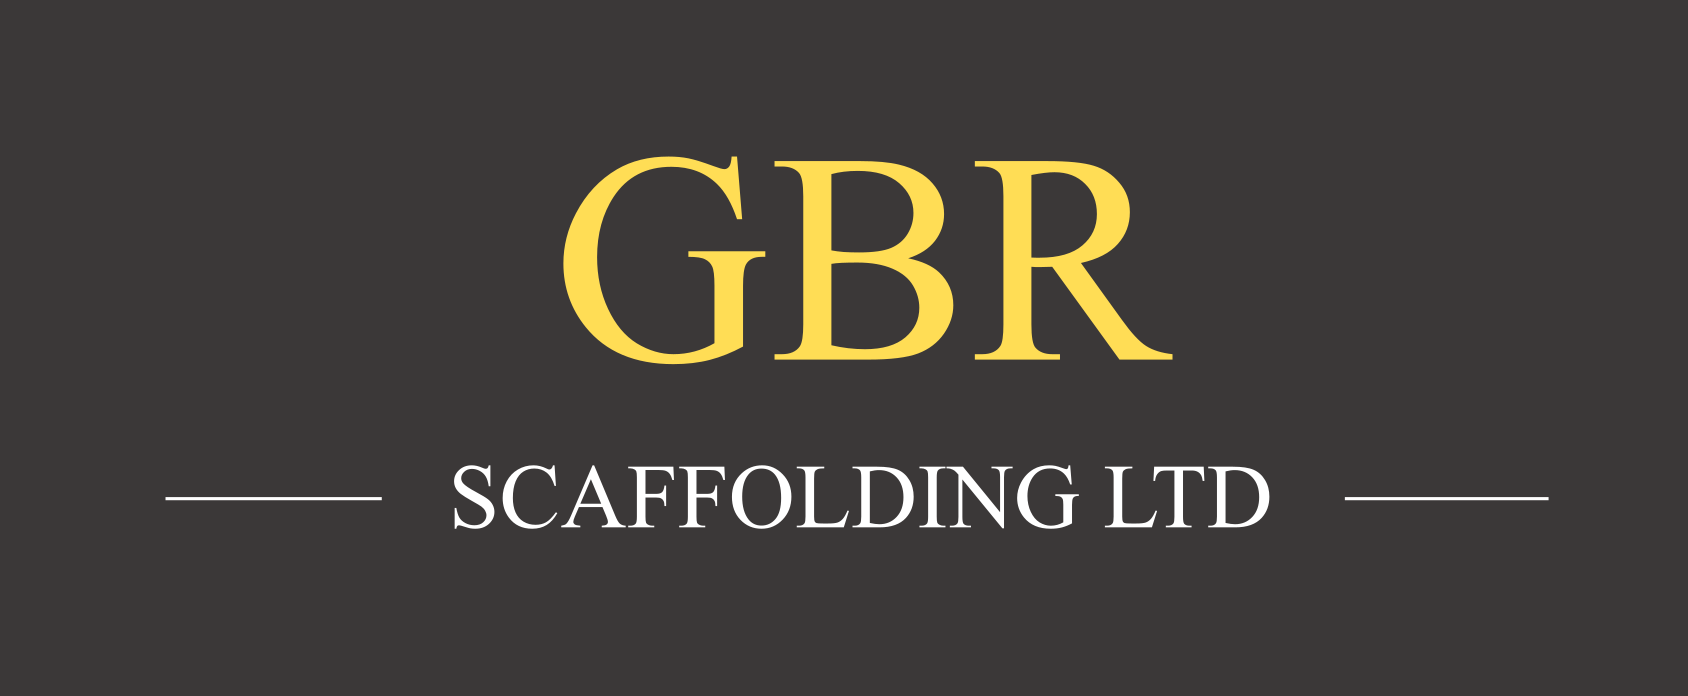 GBR Scaffolding Site Safety Inspections